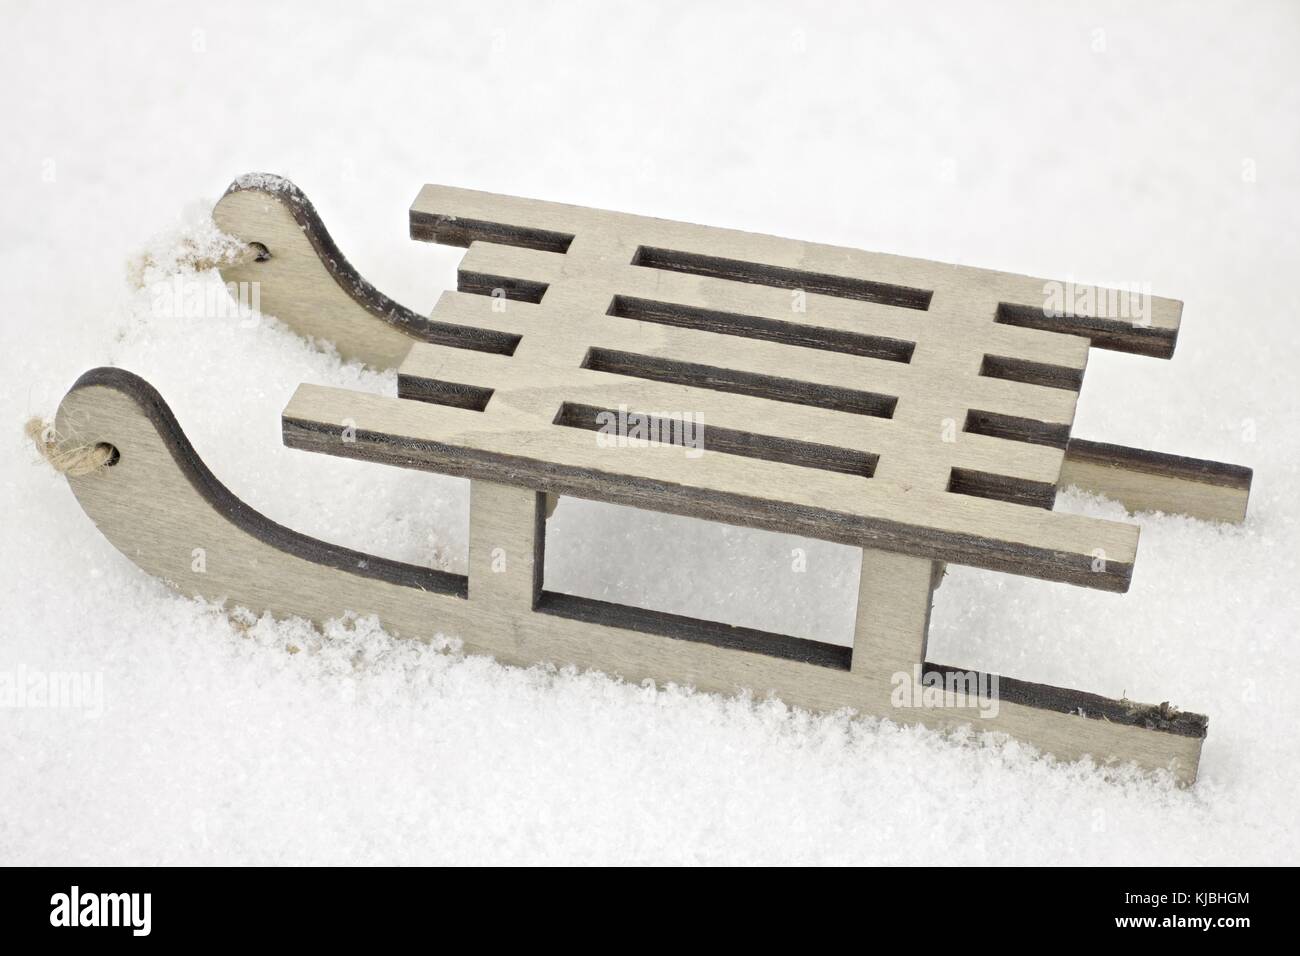 A small wooden sled in closeup as a decorative background Stock Photo